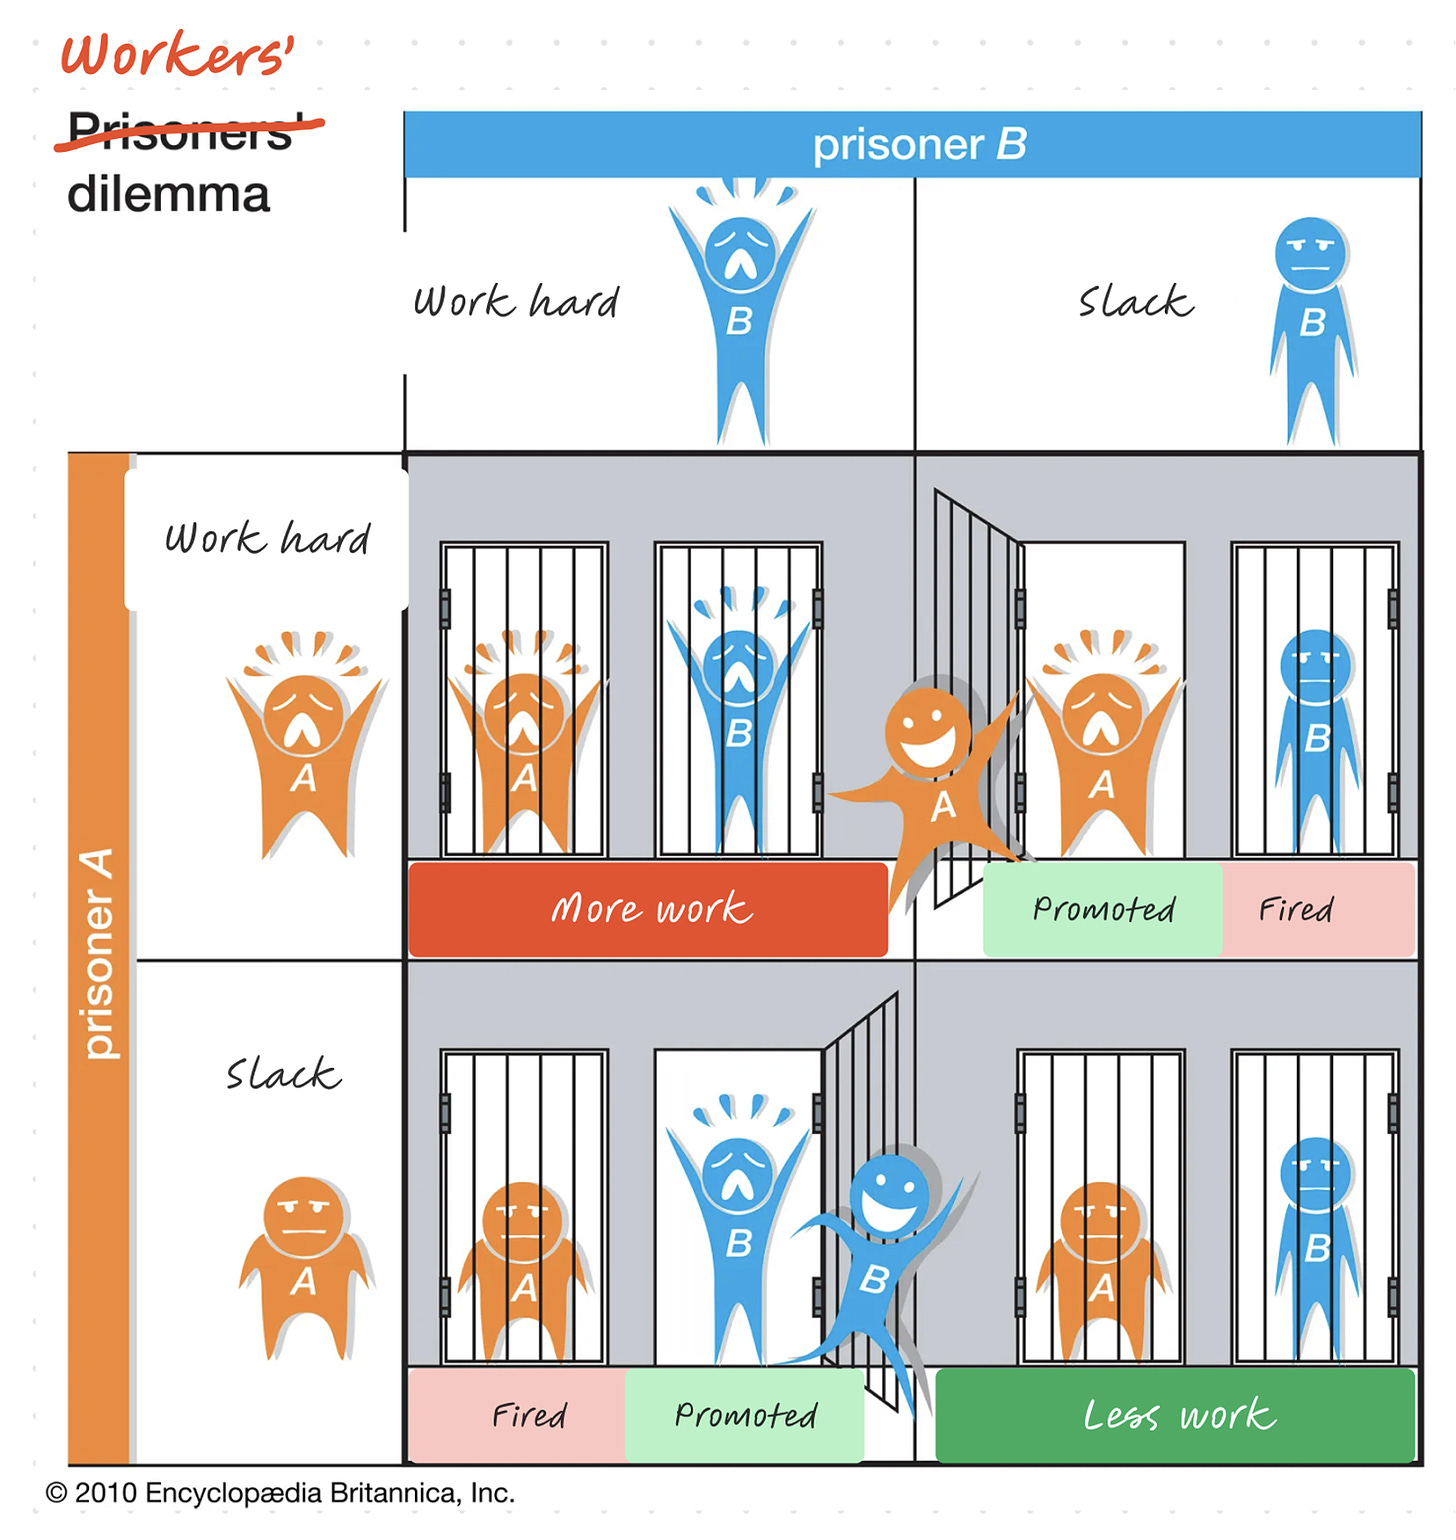 Adaptation of Prisoners’ dilemma for work by me.  